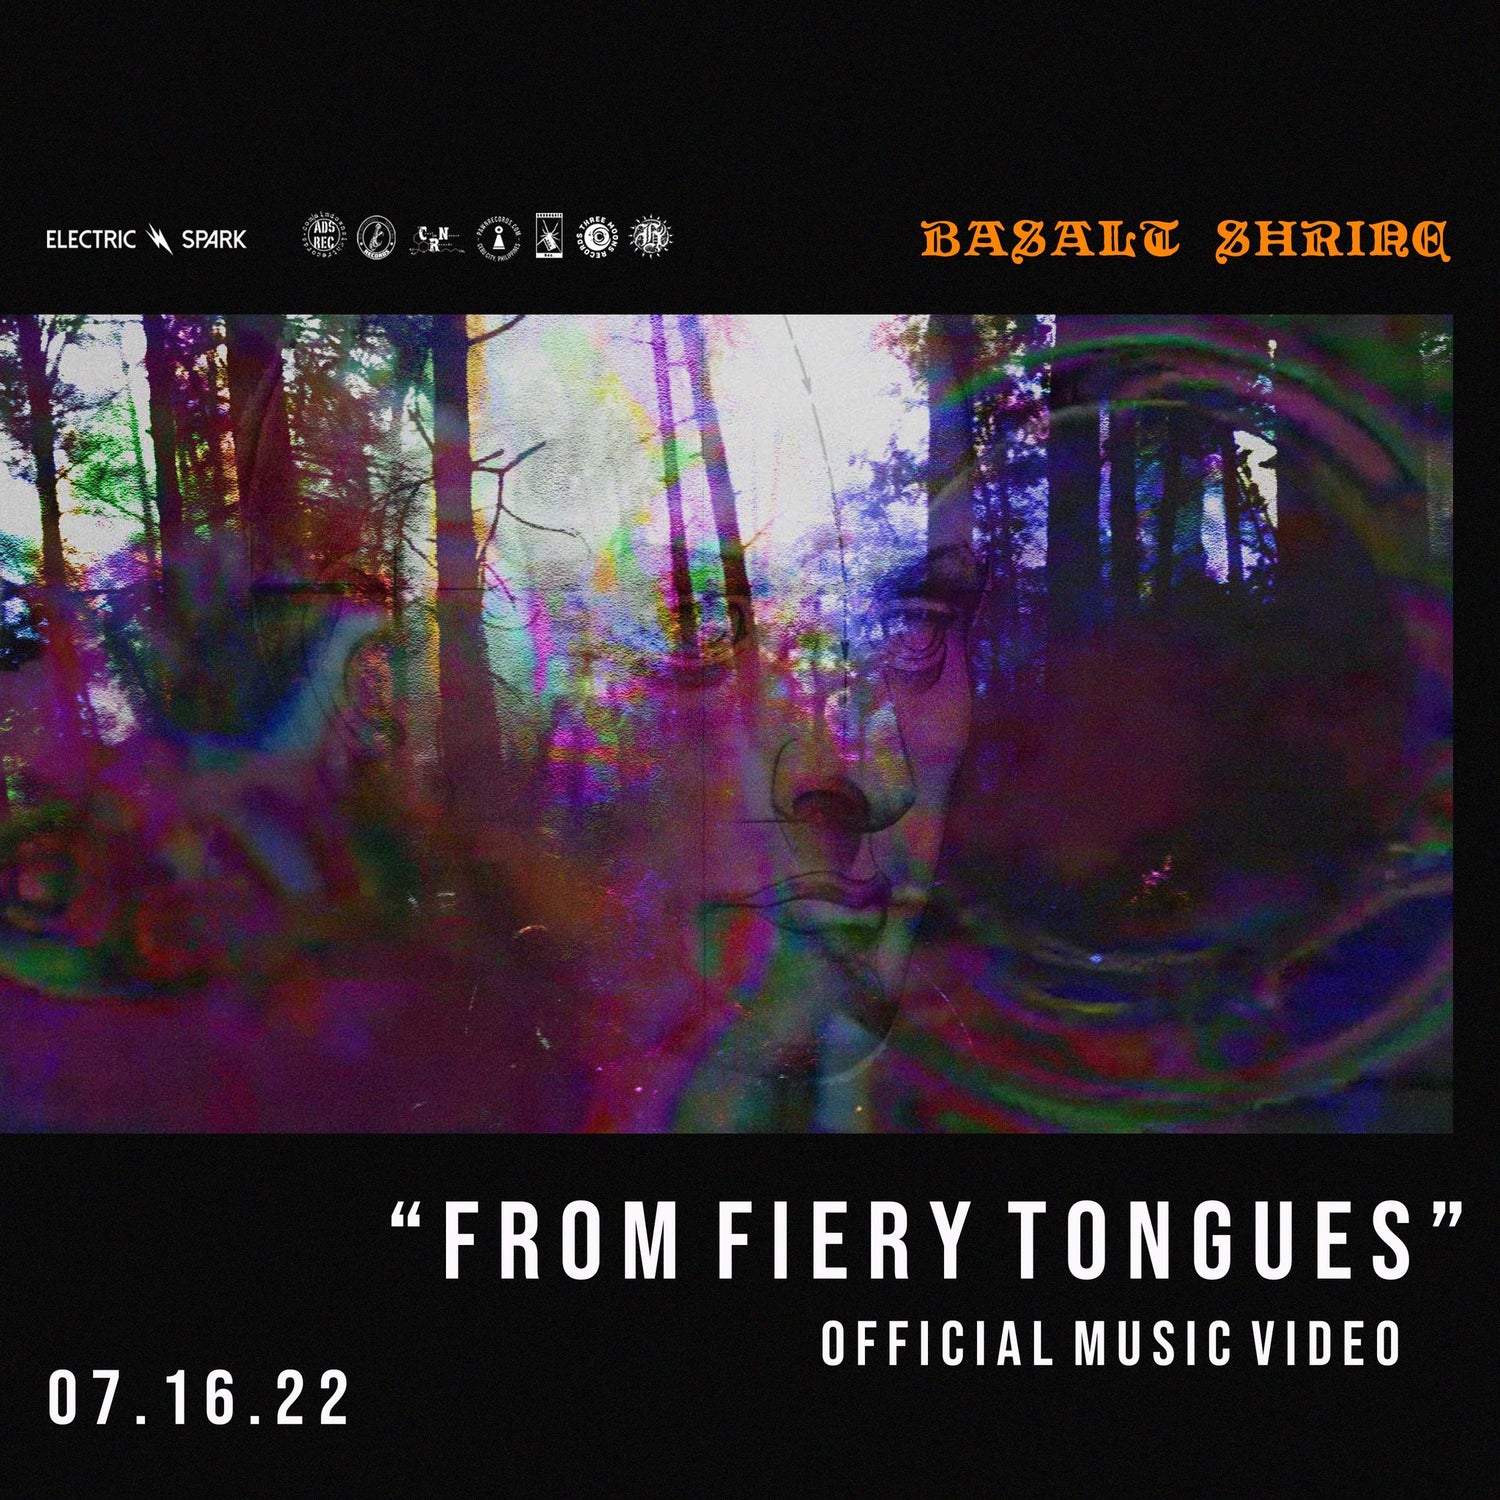 Basalt Shrine  "From Fiery Tongues"video